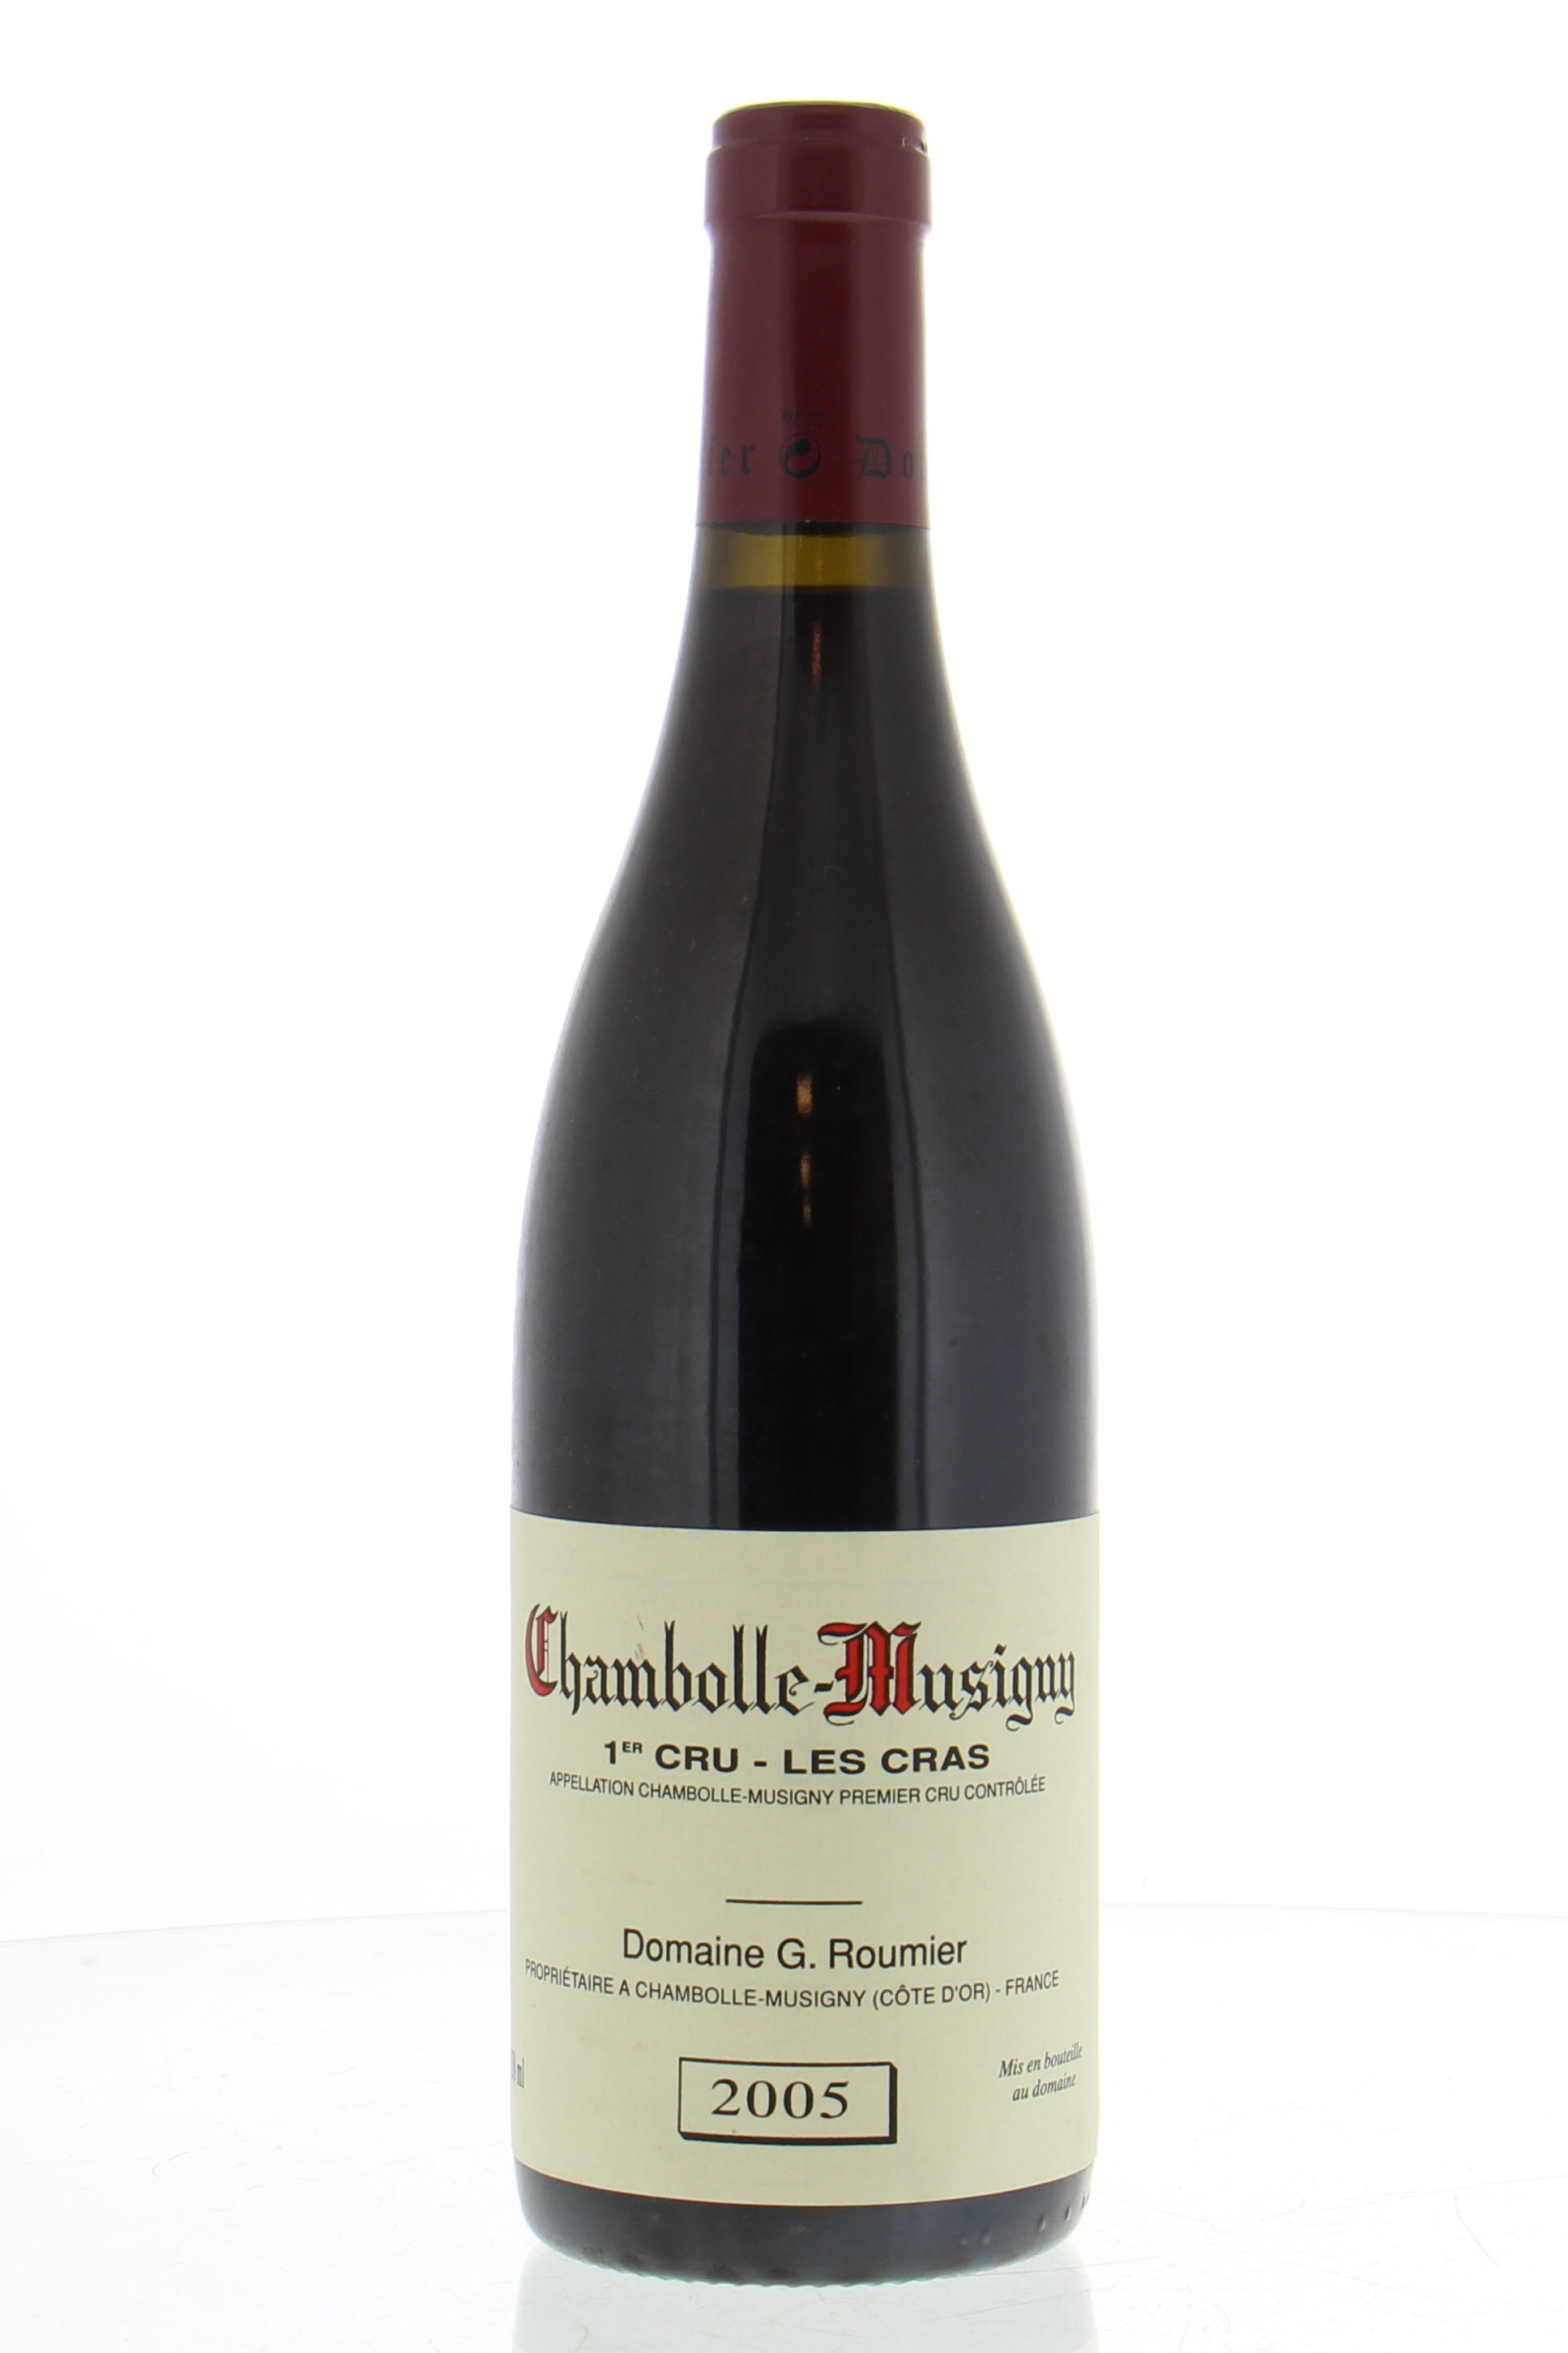 Georges Roumier - Chambolle Musigny les Cras 1cru 2005 Perfect